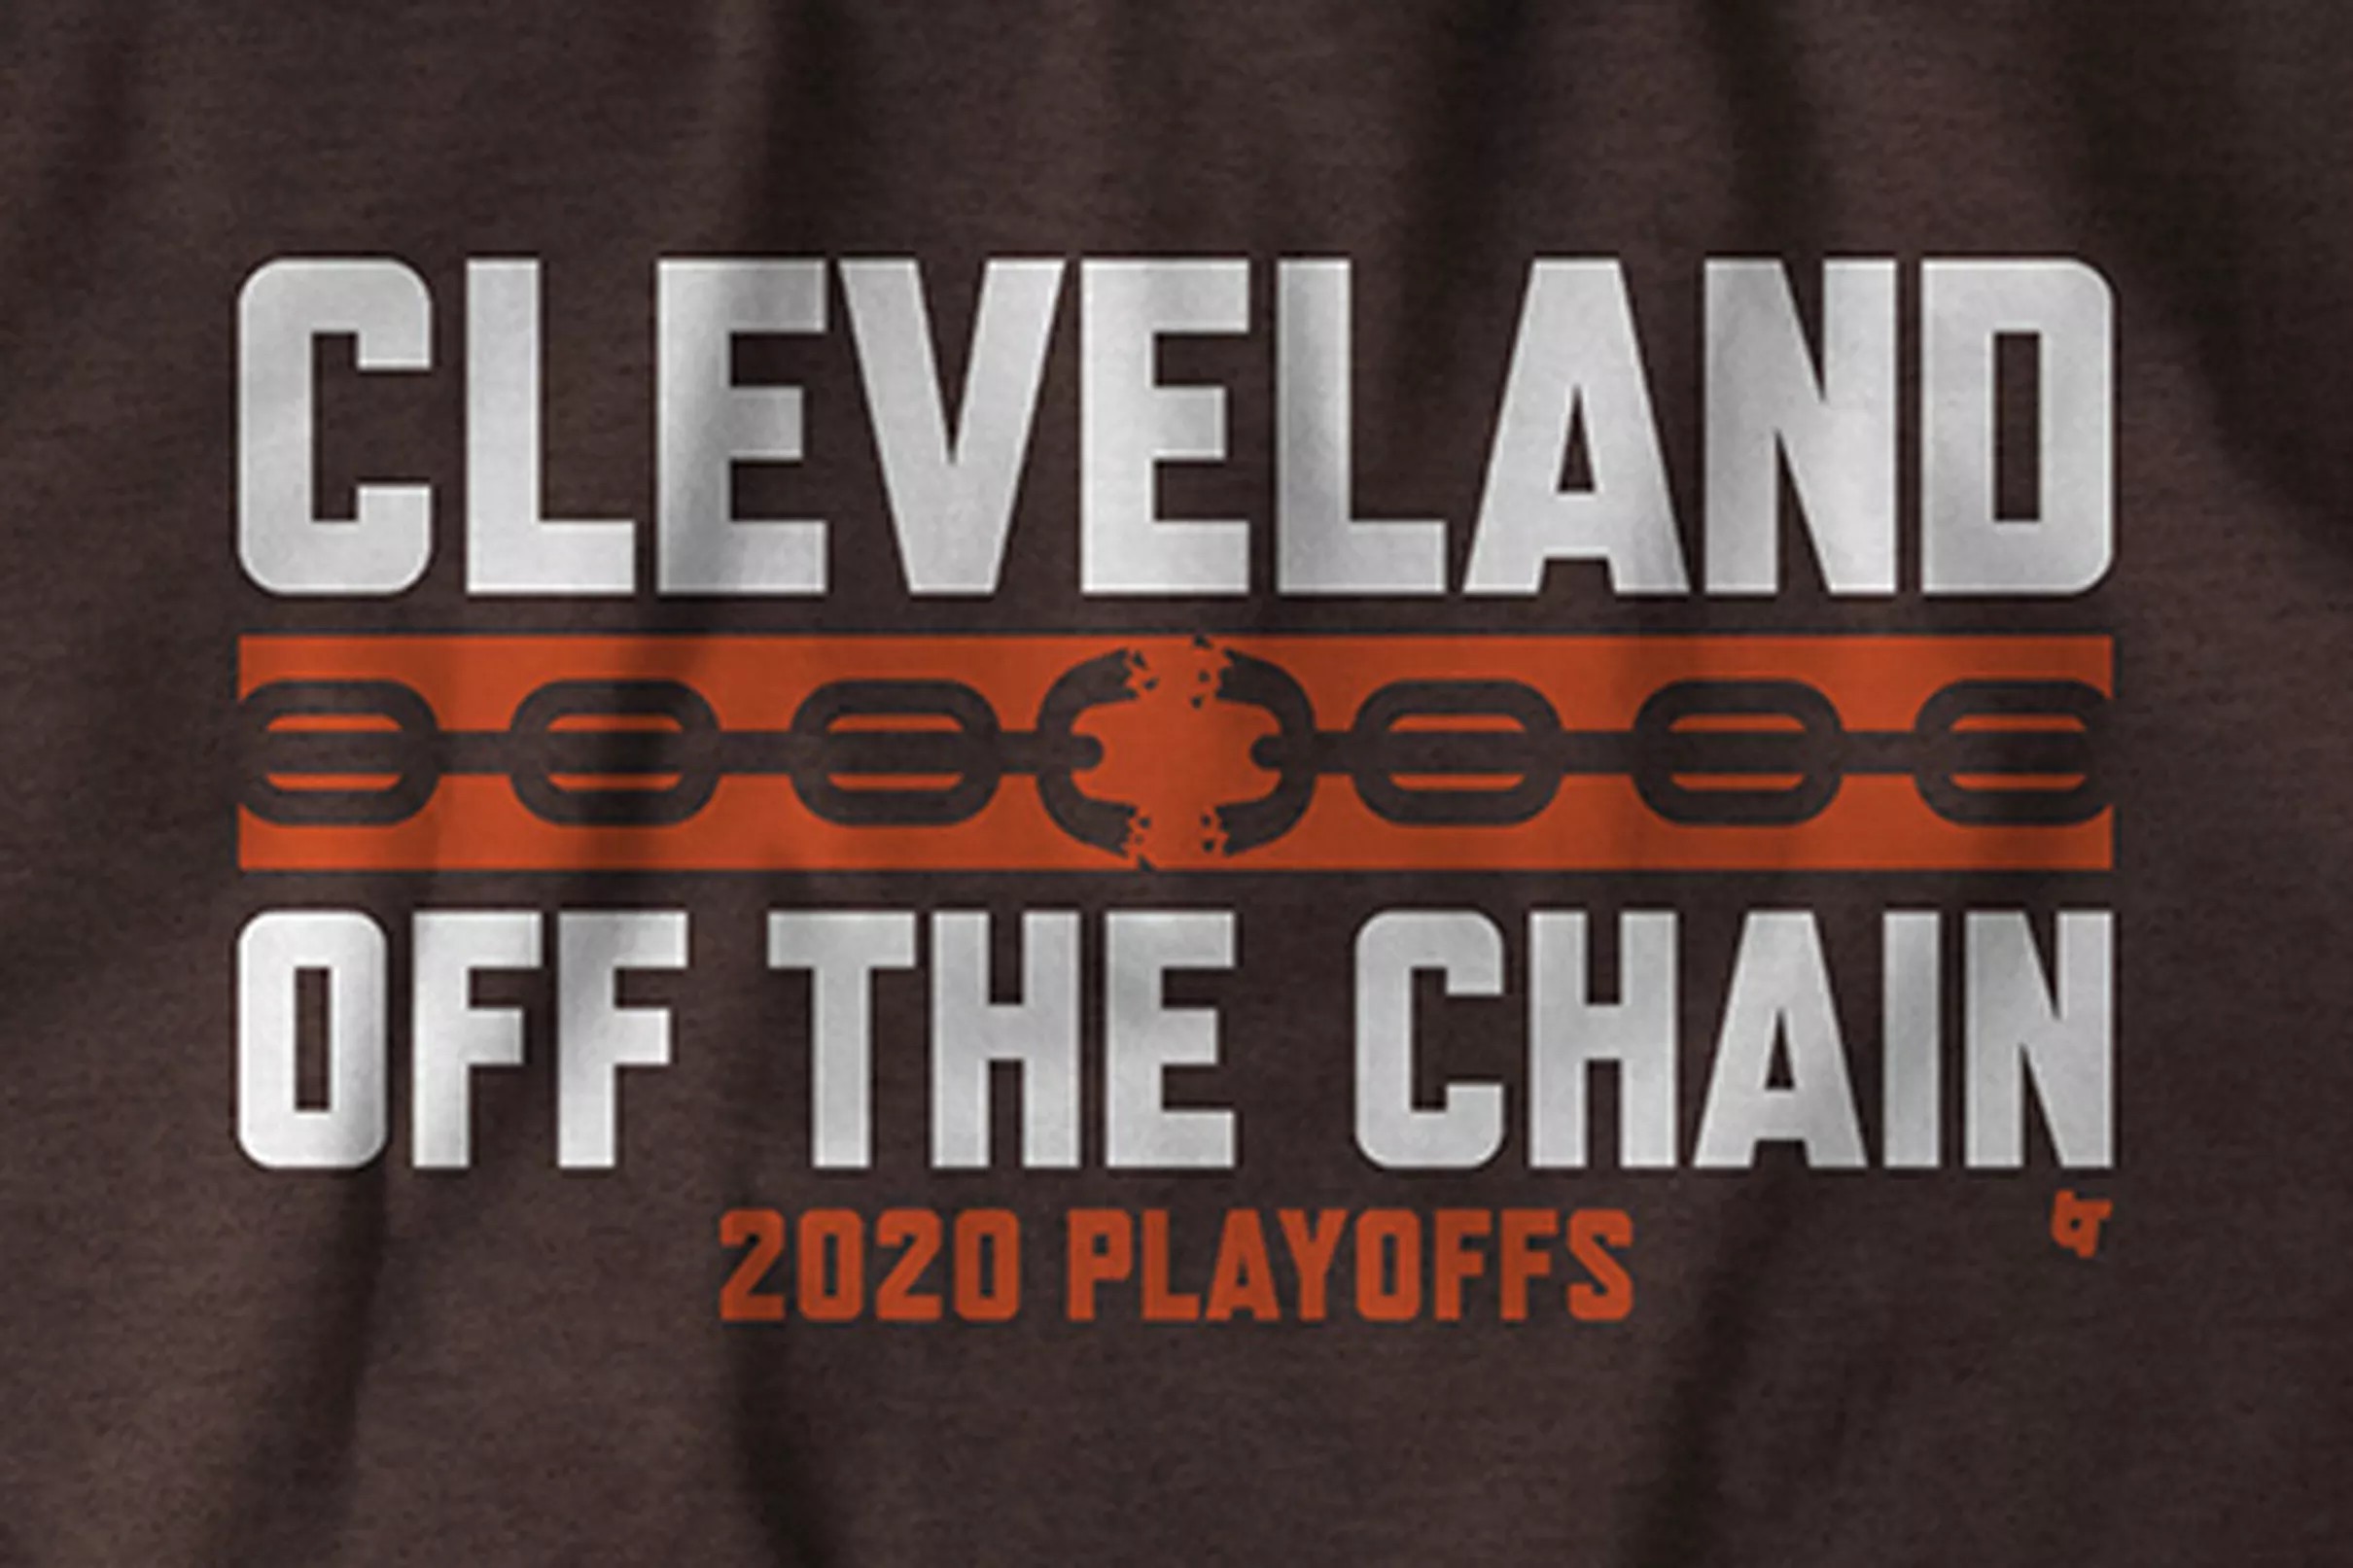 Cleveland Browns playoffs tshirt and hoodie now available